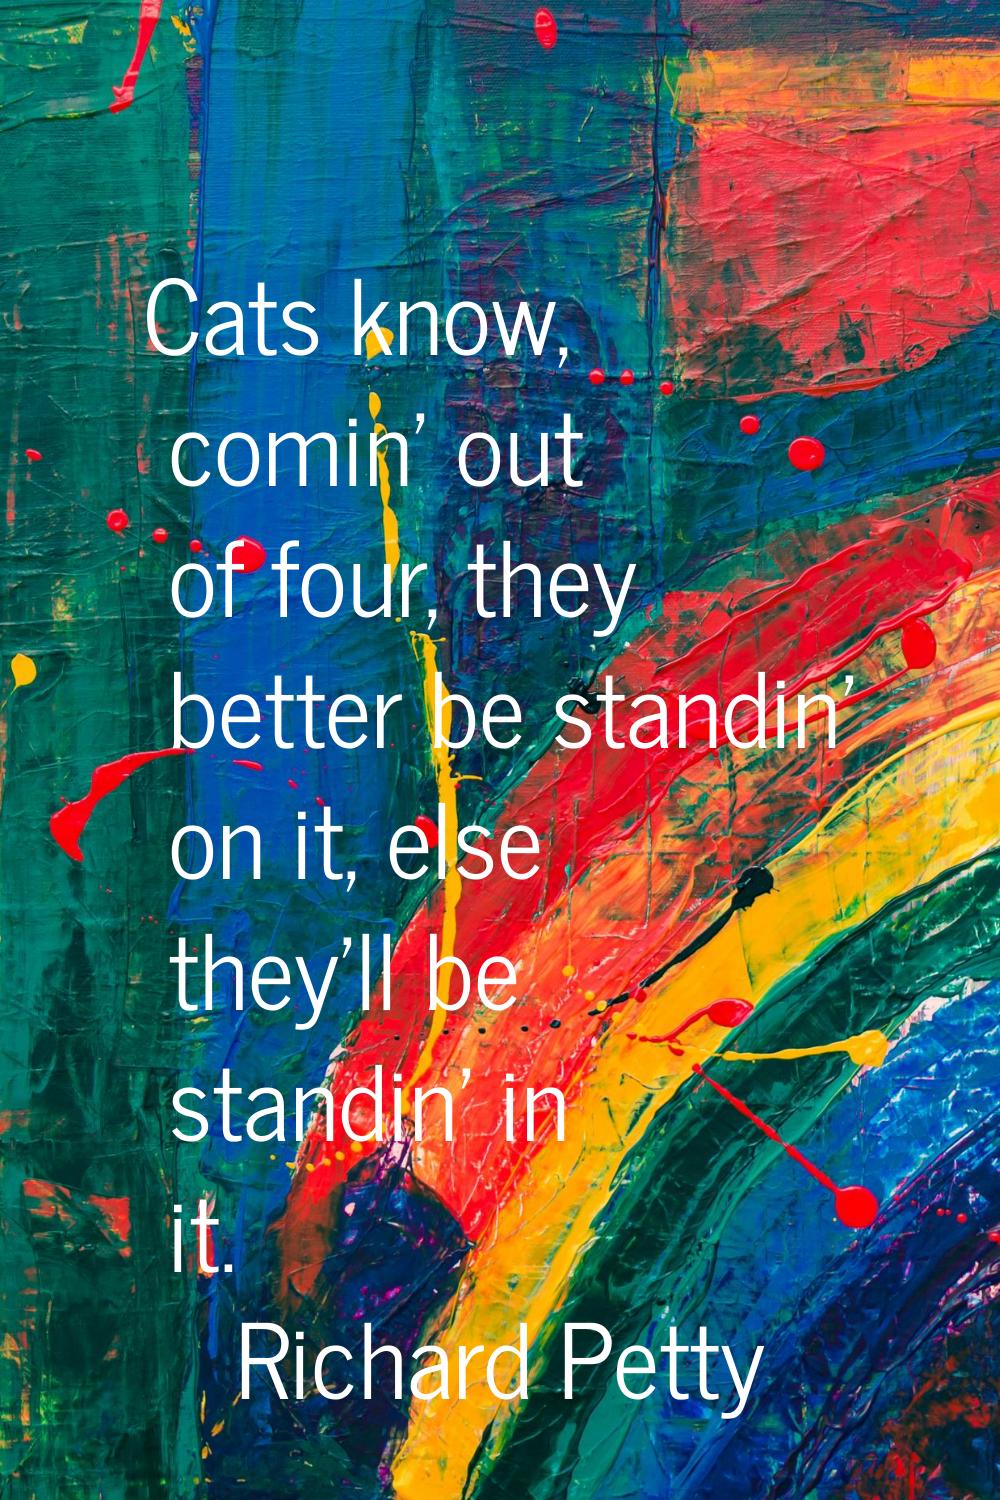 Cats know, comin' out of four, they better be standin' on it, else they'll be standin' in it.